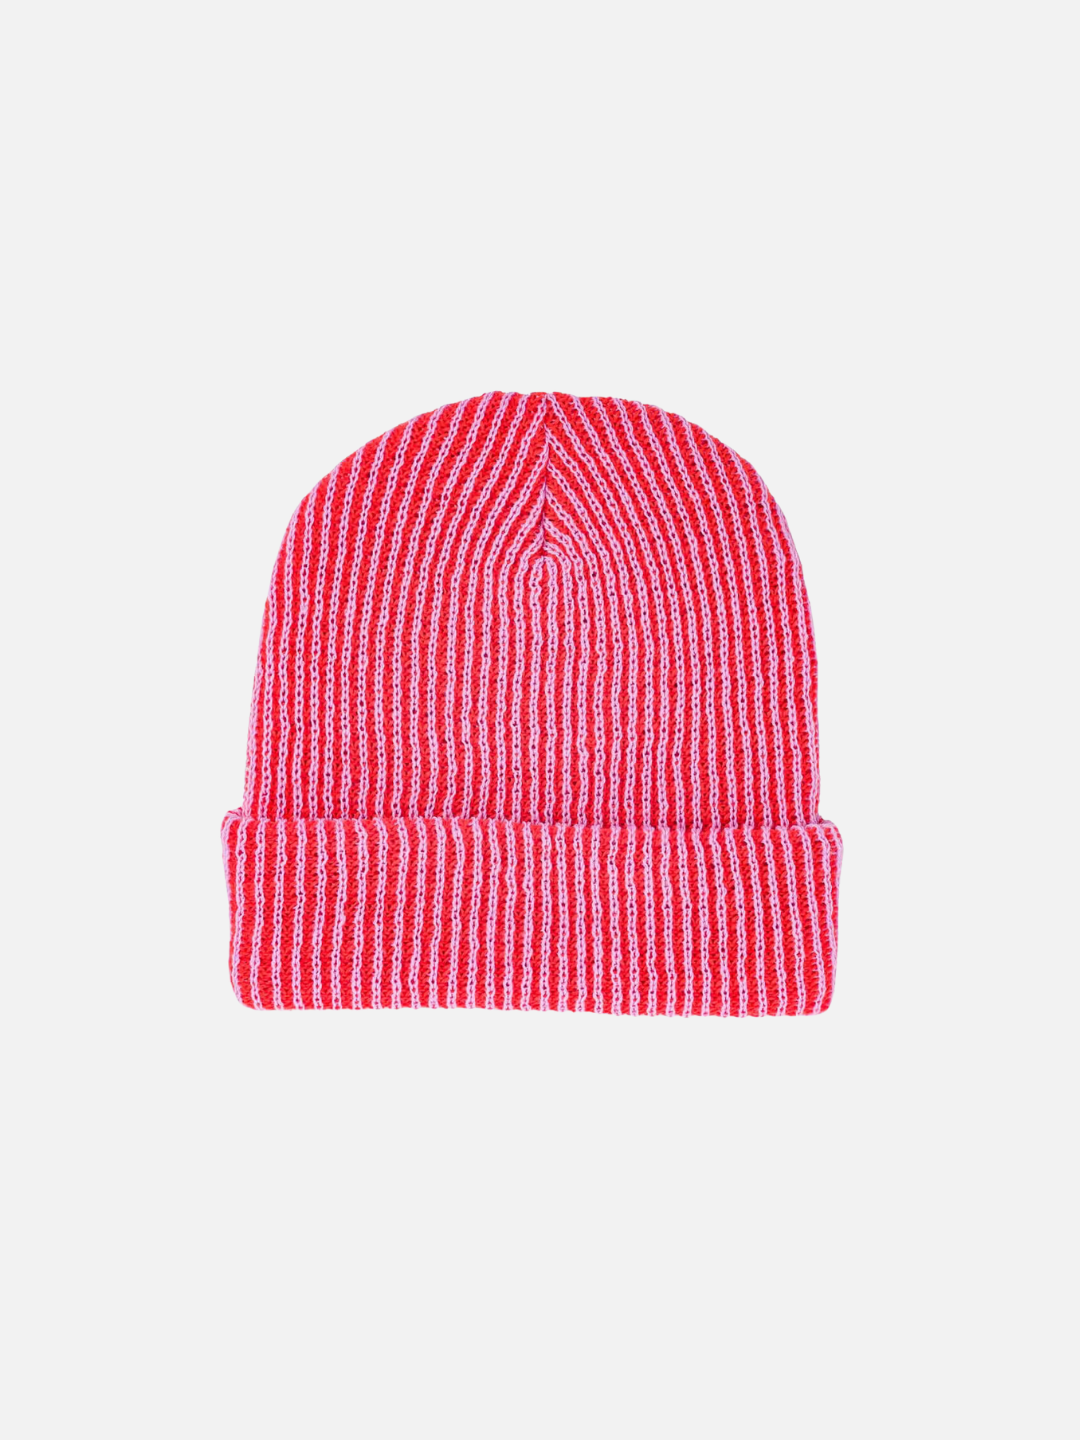 Front view of a bright pink ribbed beanie for big kids and adults, with a ribbed cuff. The ribbed texture reveals a second yarn color that's lilac pink.